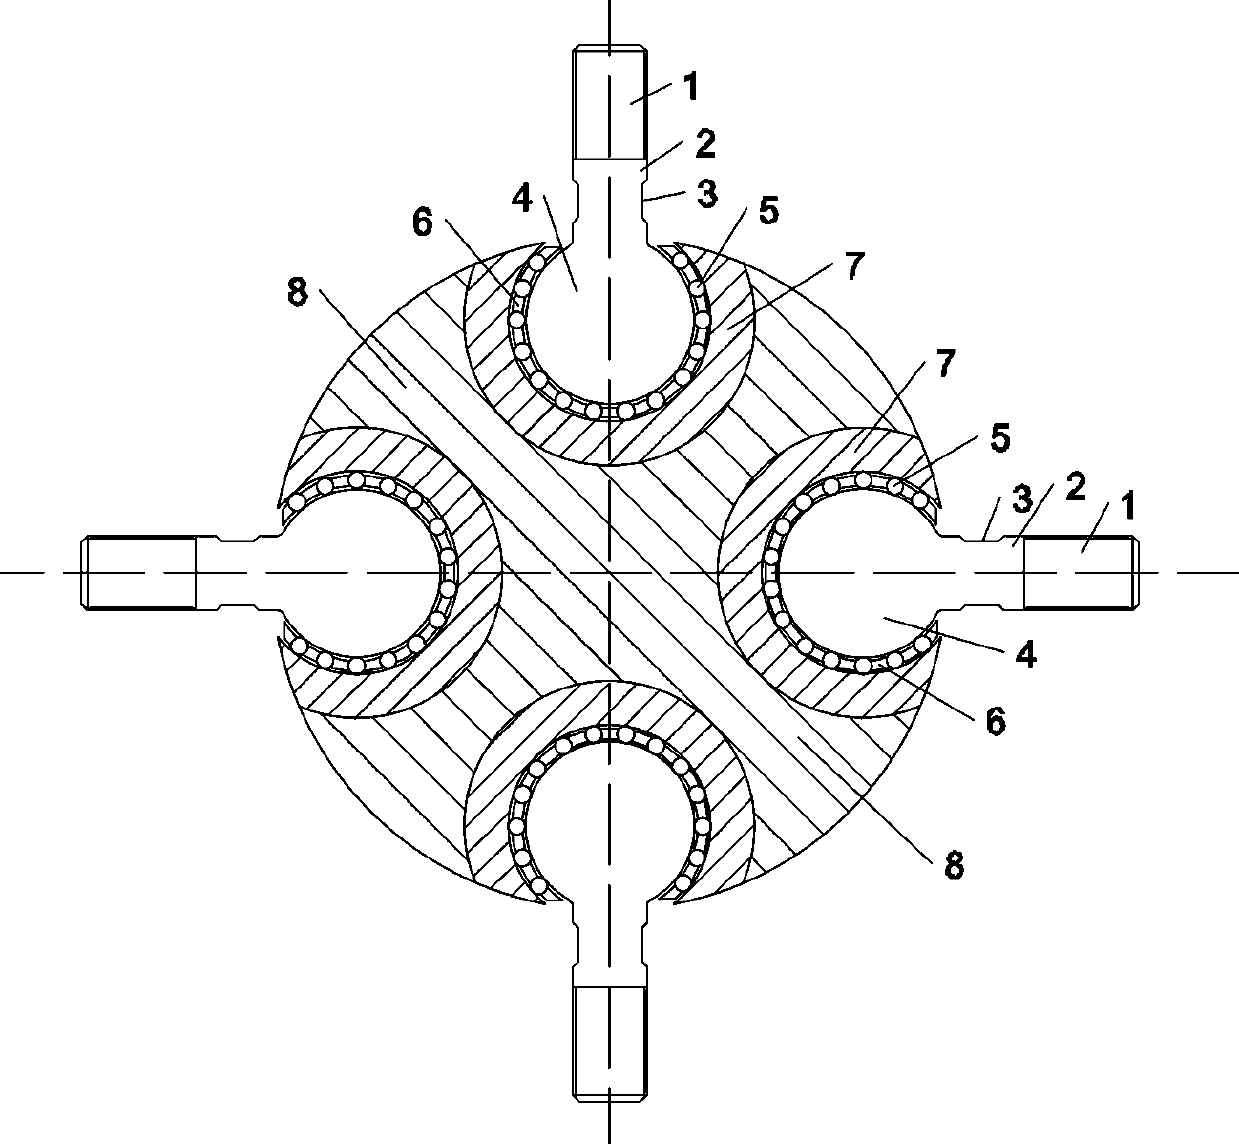 Screw joint spherical hinge structure suitable for truss connection